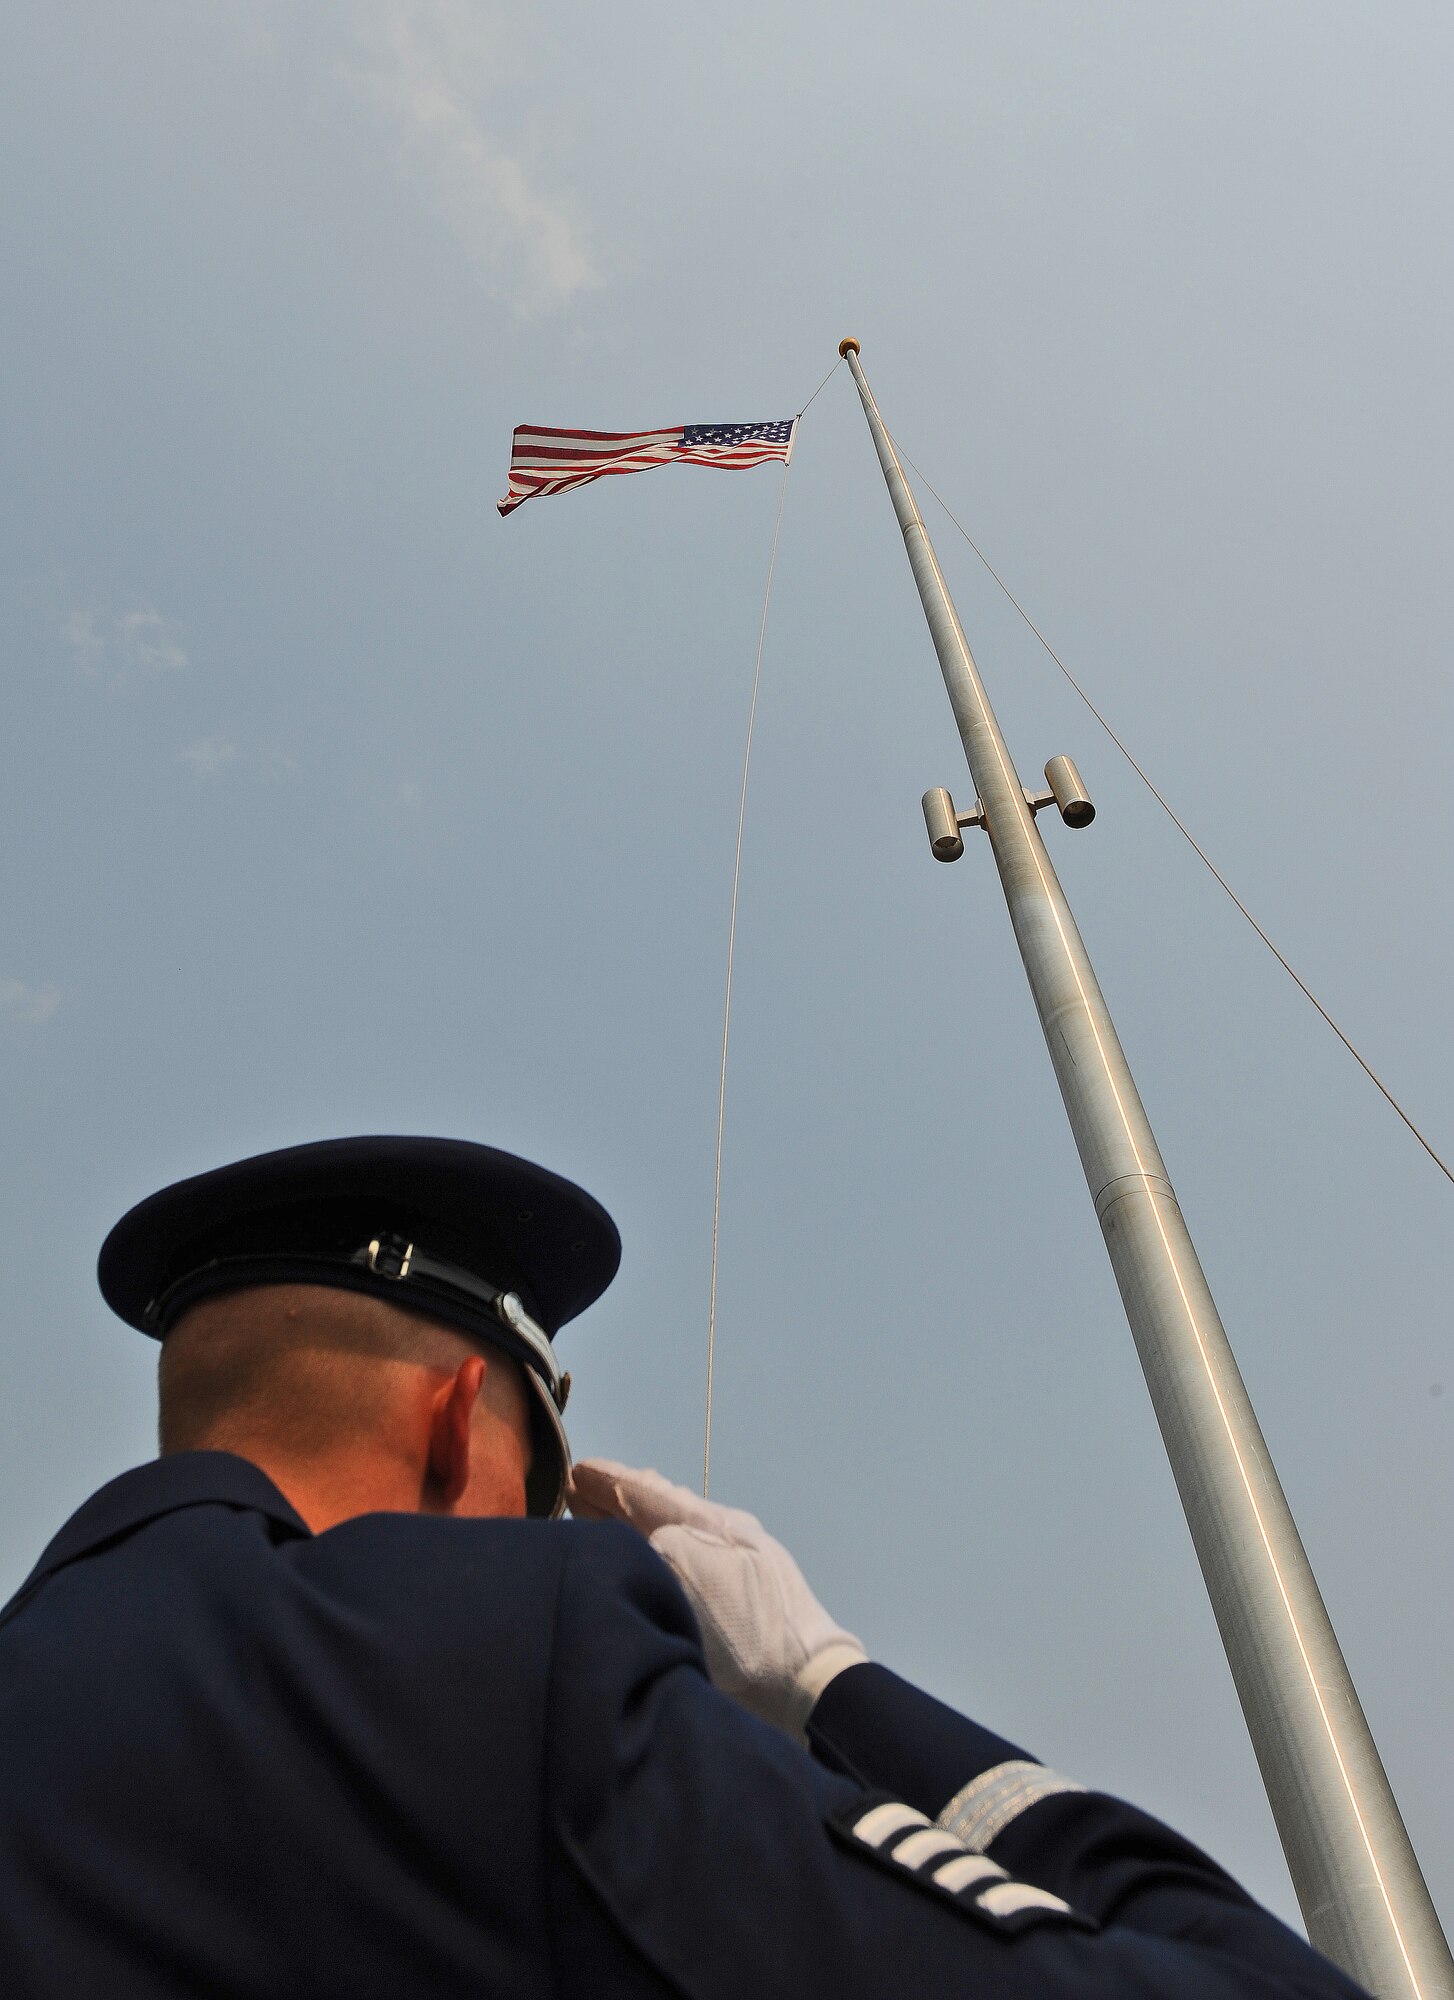 WHITEMAN AIR FORCE BASE, Mo. -- A ceremonial guardsman from the 509th Bomb Wing Honor Guard salutes during the playing of the Star Spangled Banner at a Wing Retreat Ceremony in honor of Memorial Day May 24, 2012. Since the end of the Civil War, Memorial Day has been known as a national day of remembrance for those who have fallen while fighting in the United States Armed Forces. (U.S. Air Force photo/Senior Airman Nick Wilson) (Released)